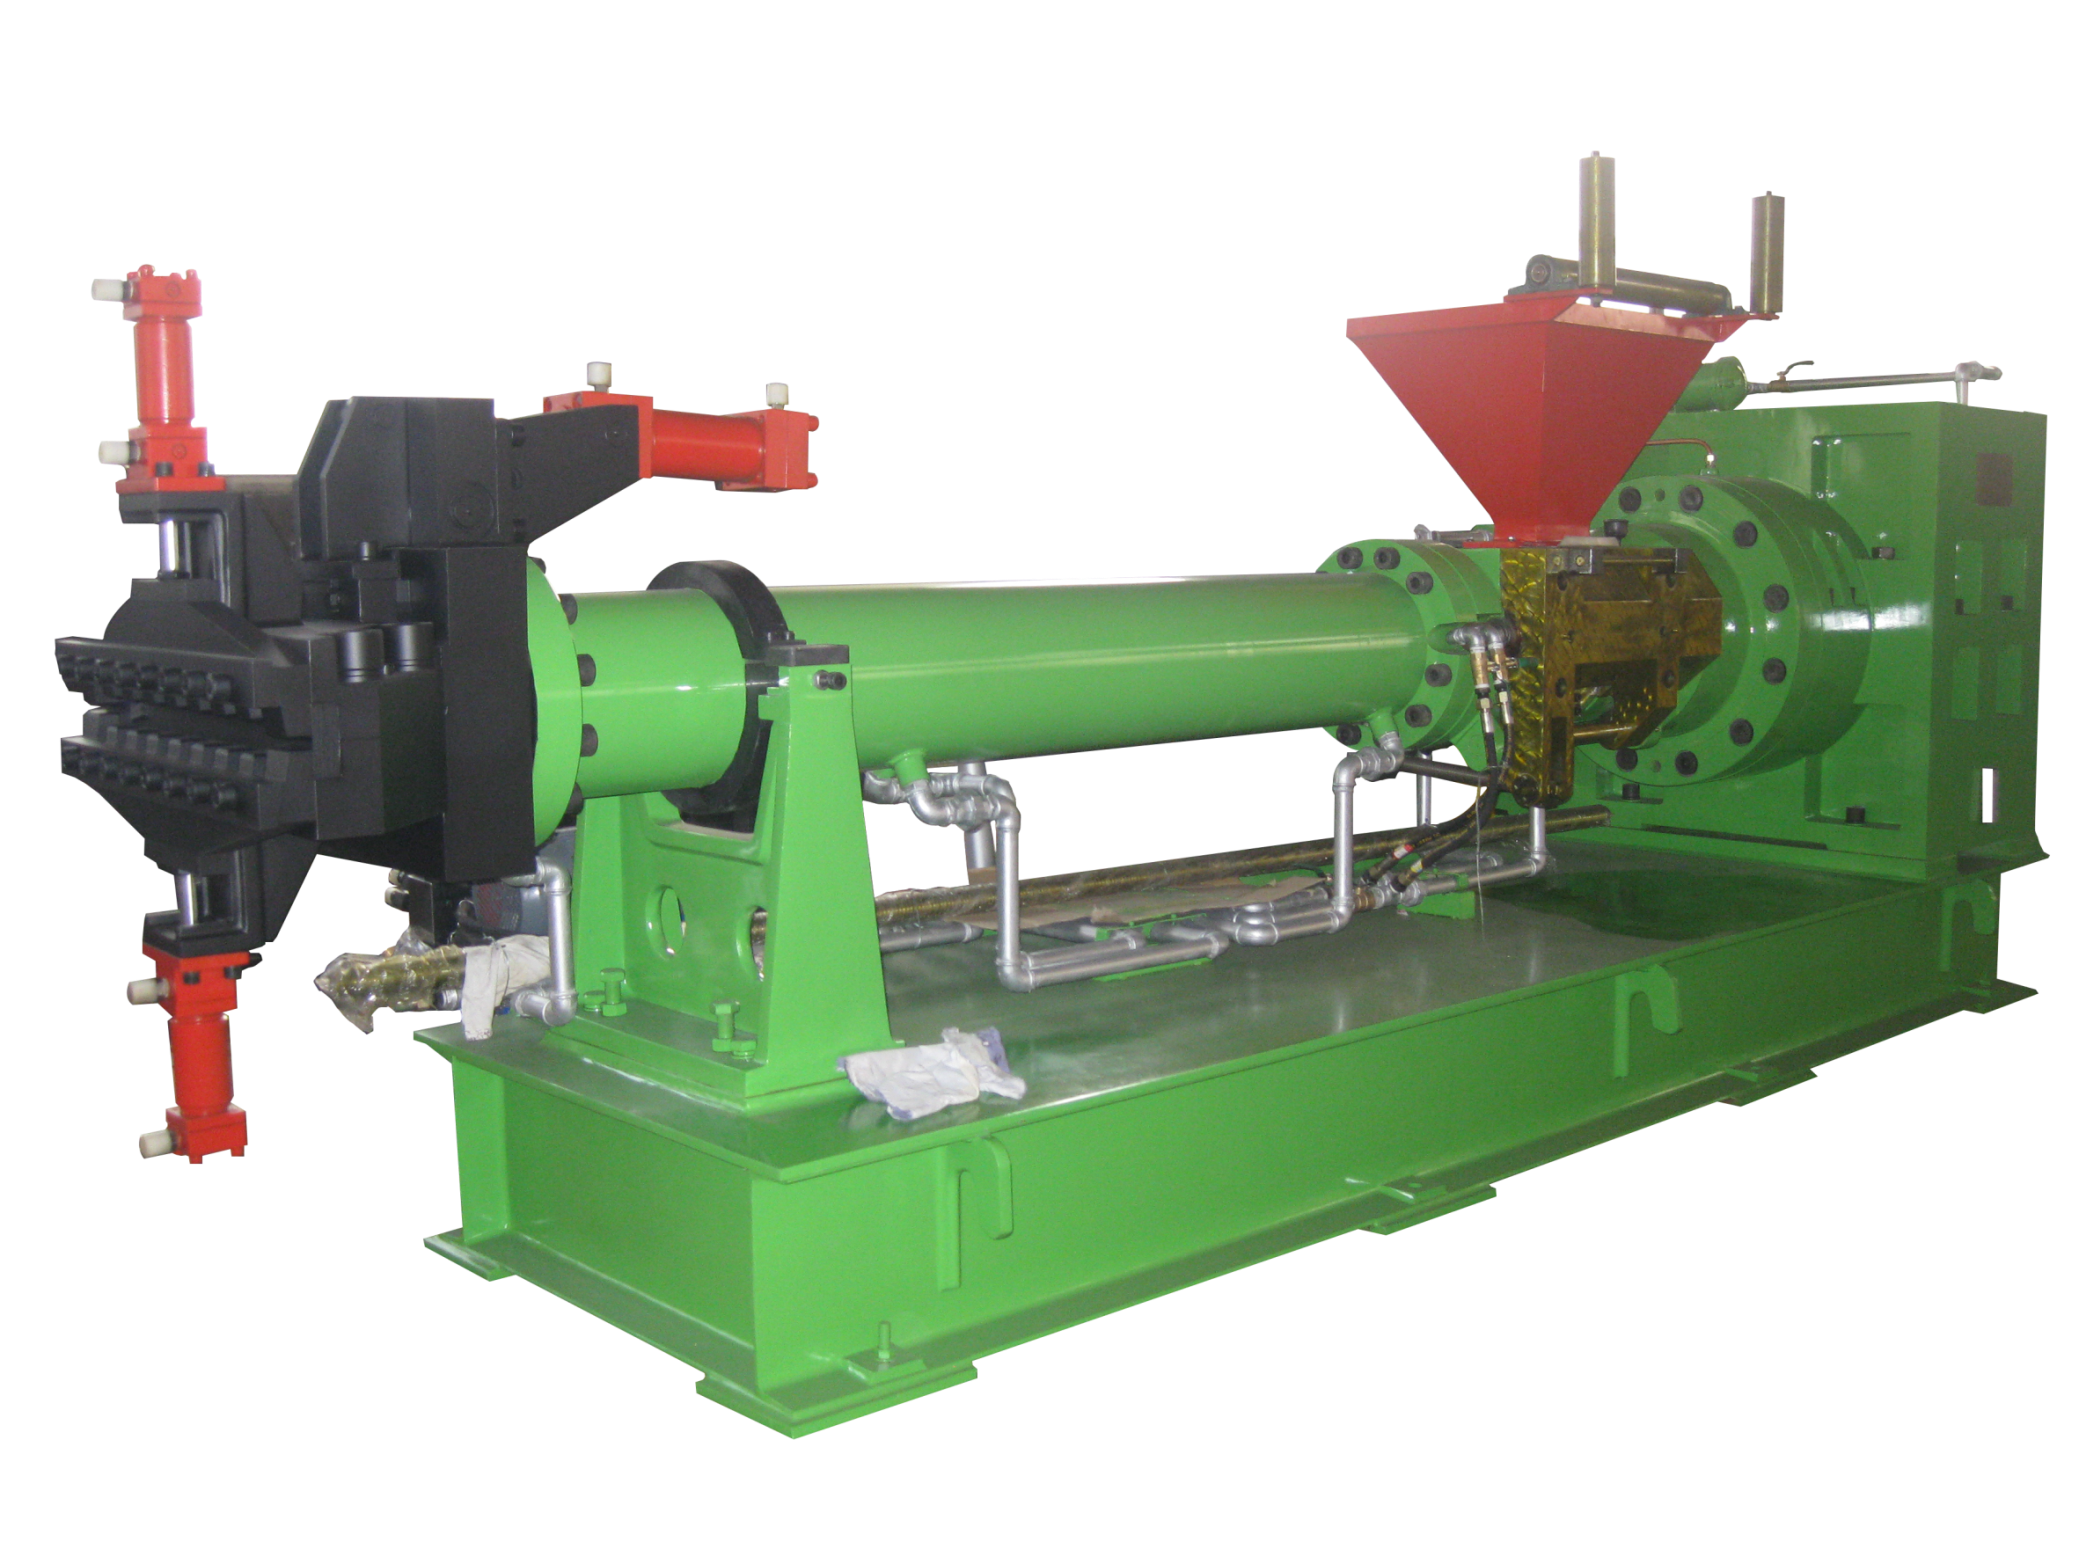 Cold feed rubber extruder